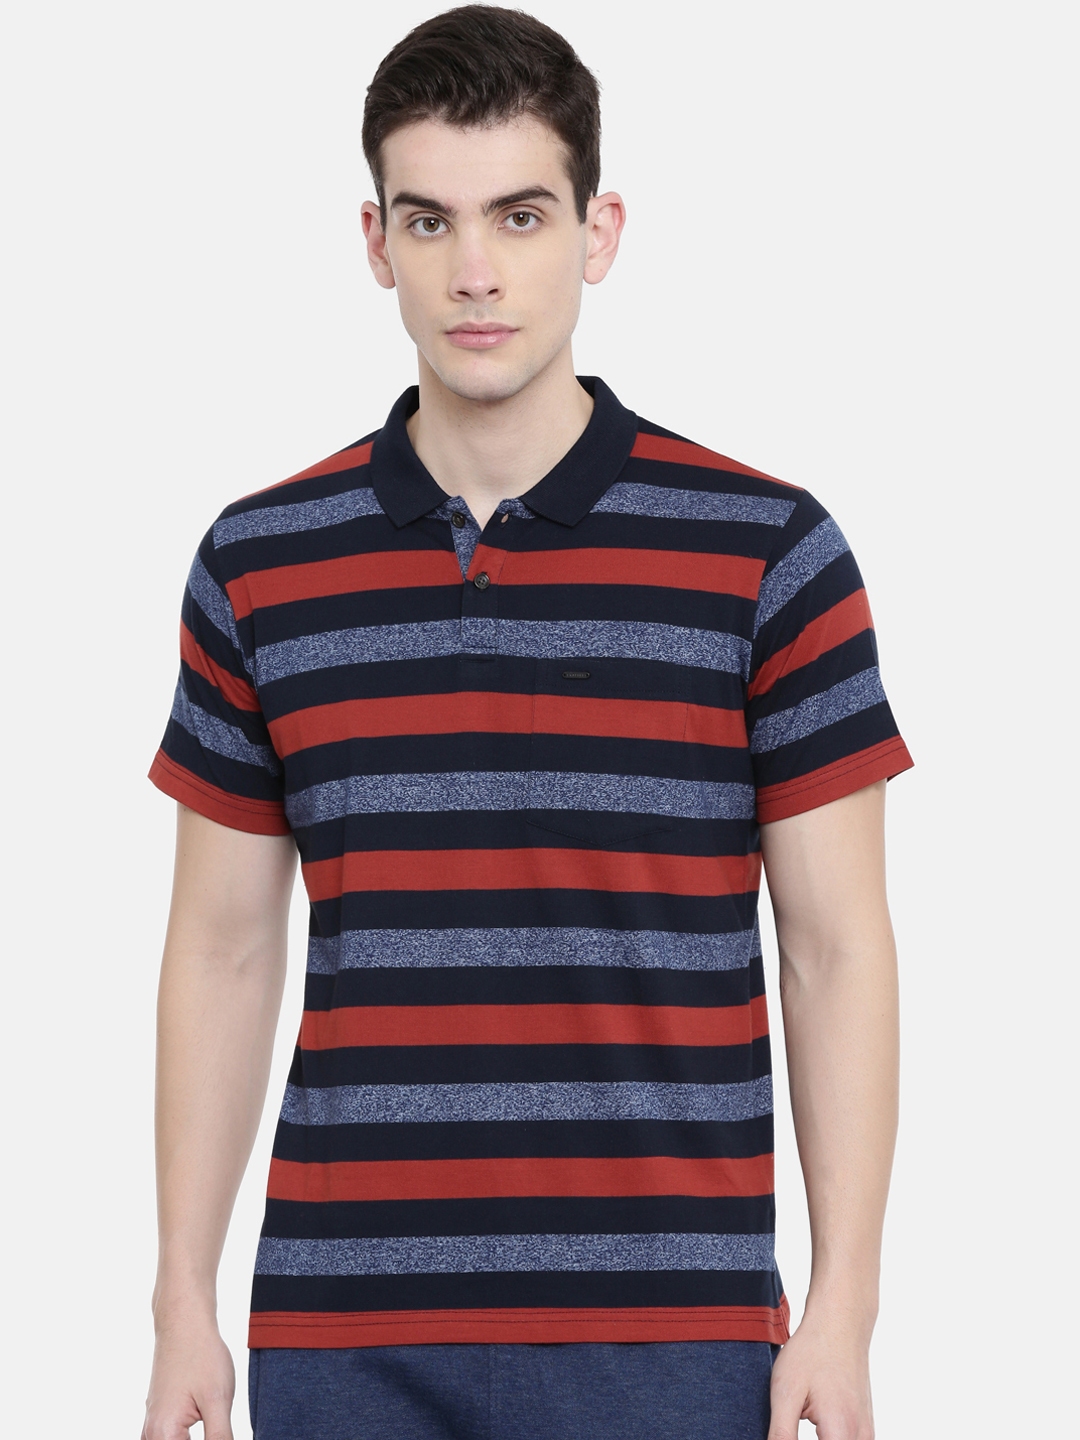 Buy Proline Men Navy Blue & Red Striped Comfort Fit Everfresh Polo ...